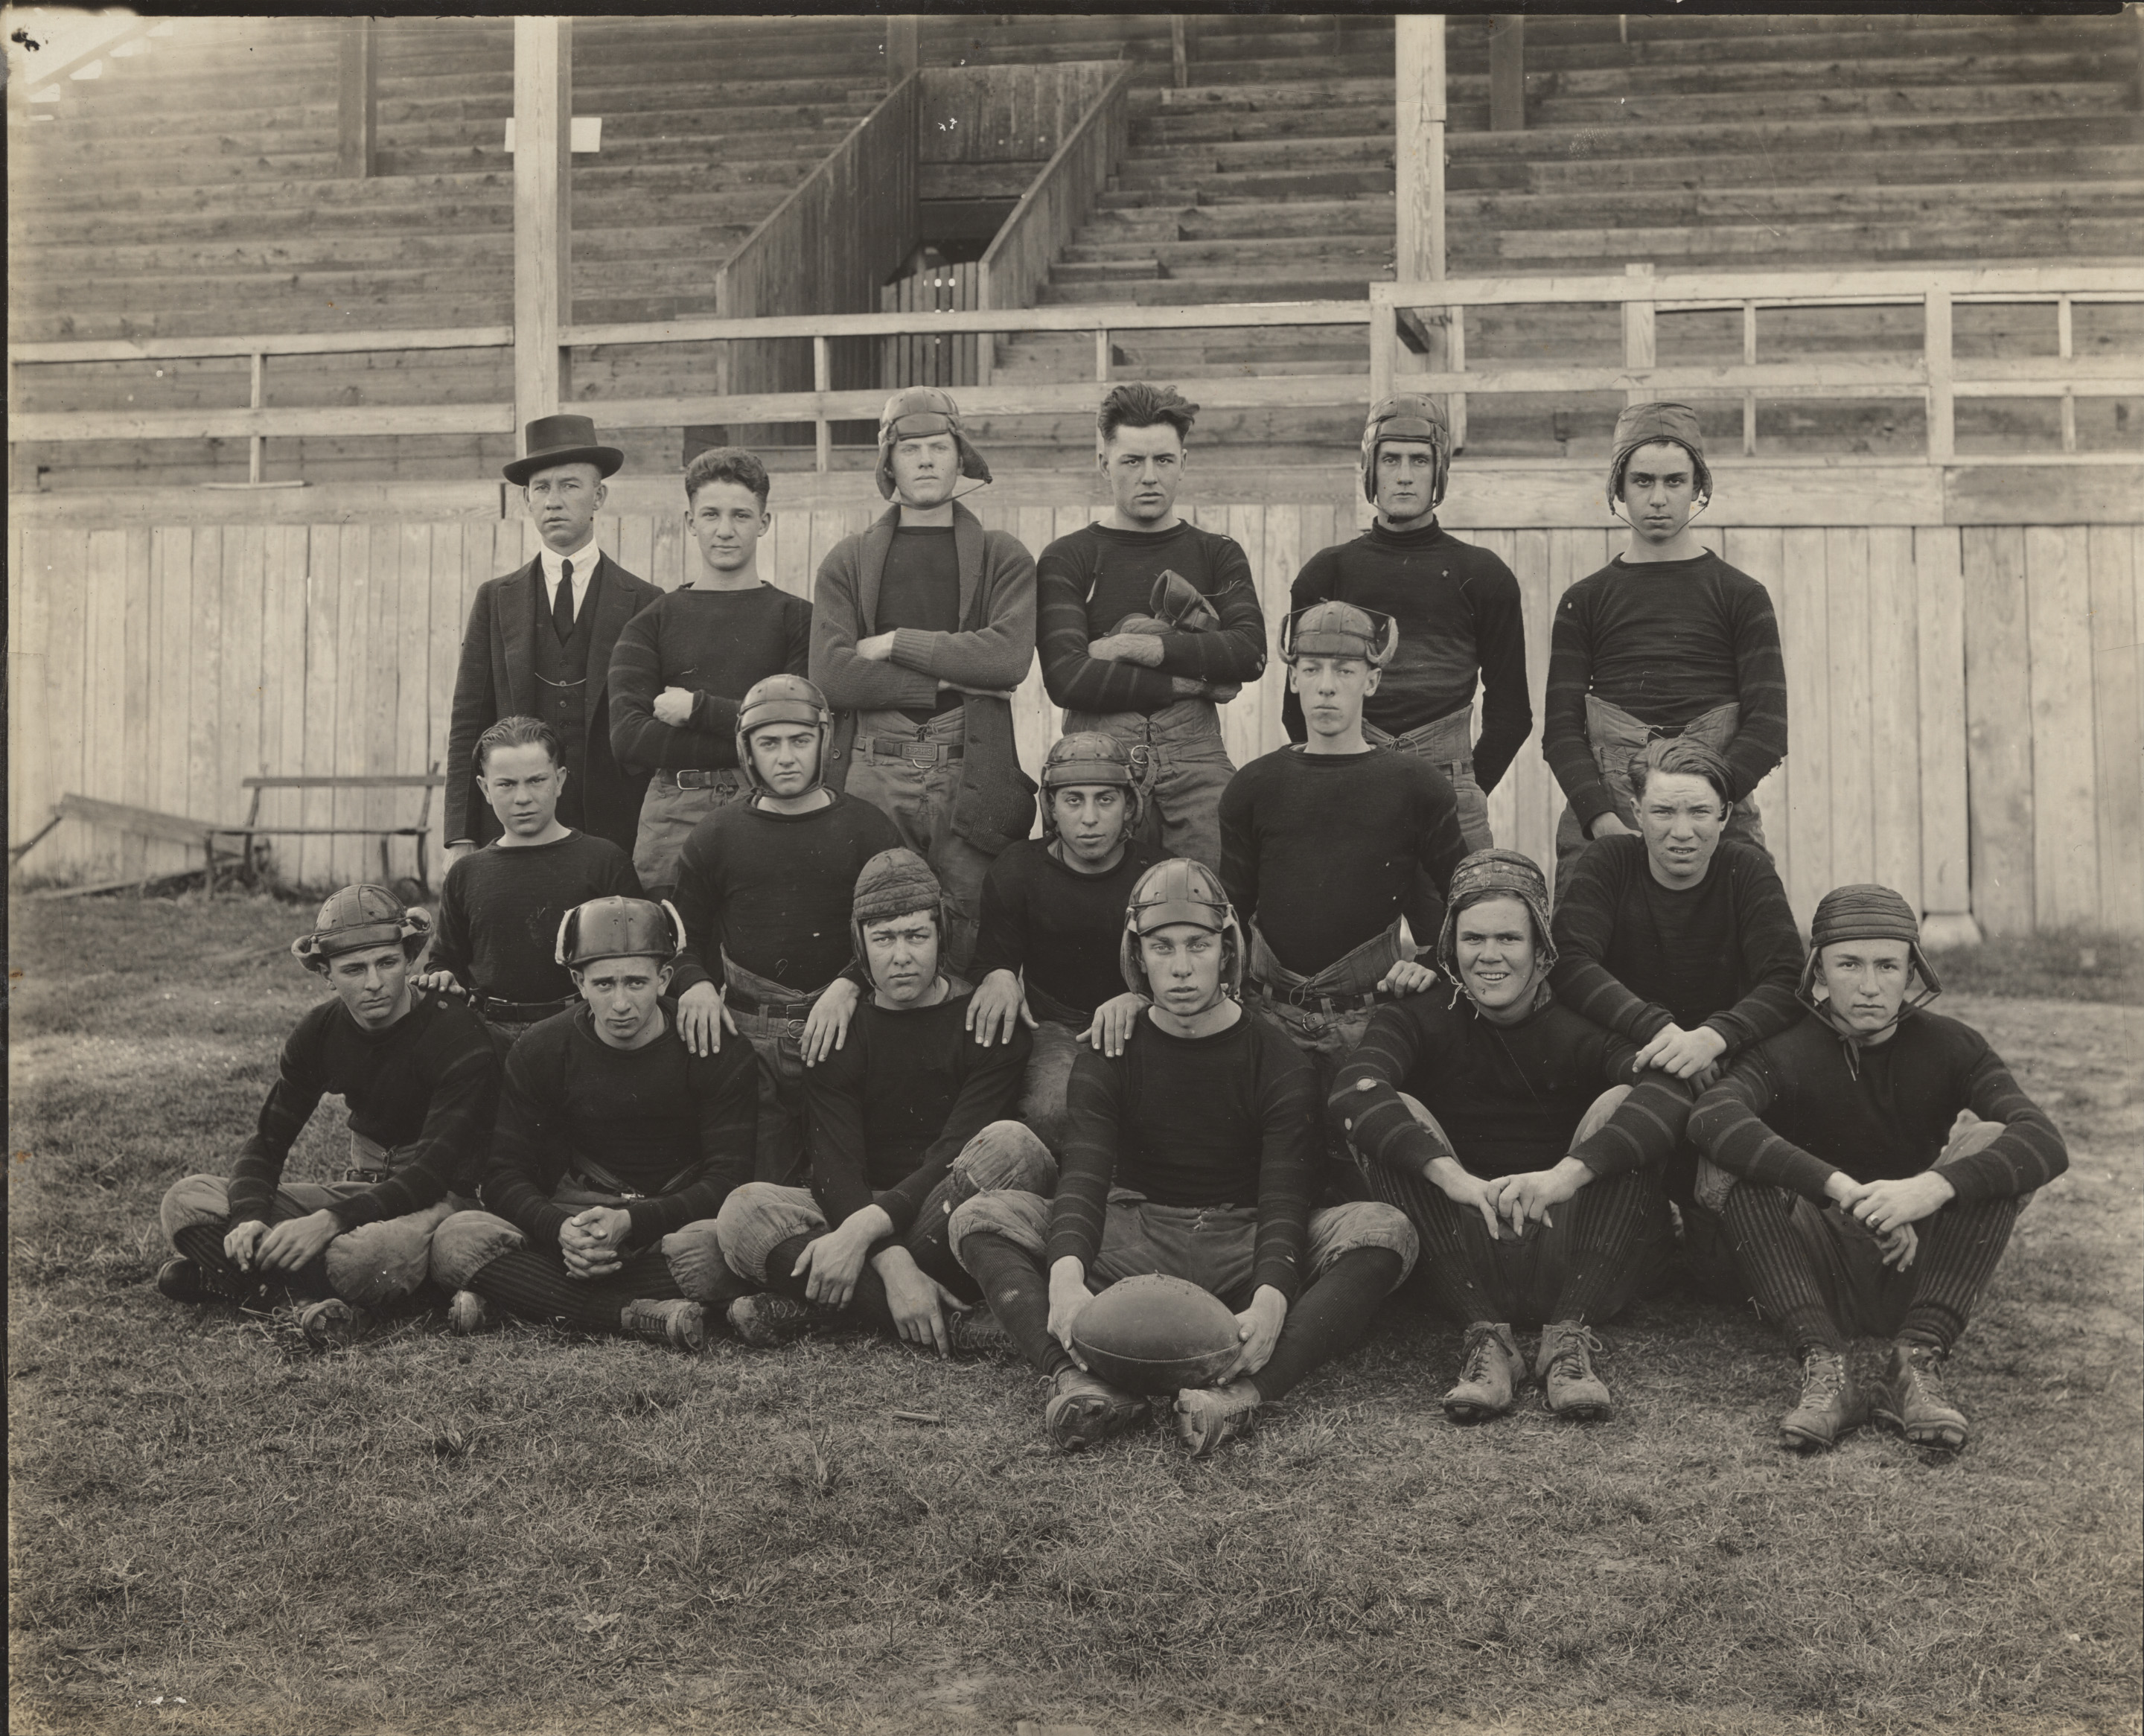 A black and white image of teenage boys in old school football uniforms. The boys pose on a field.